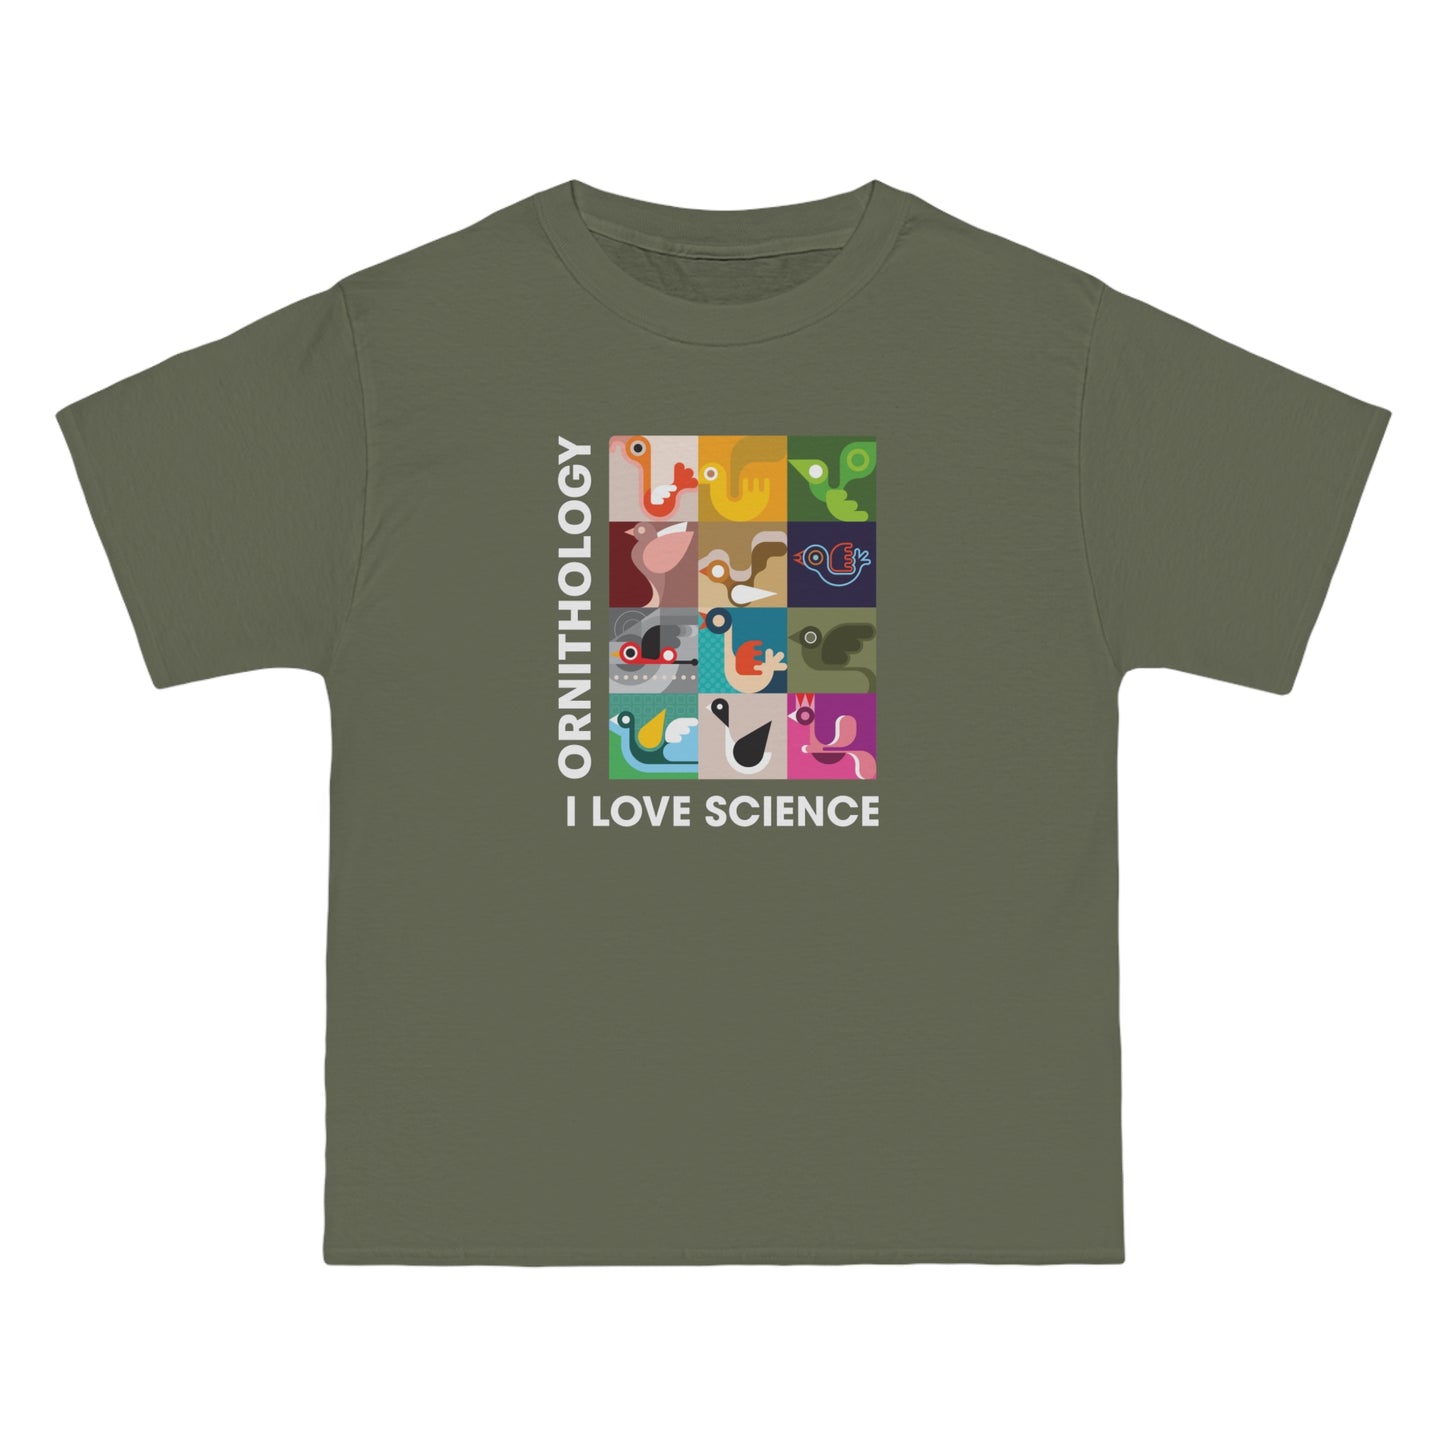 Ologies "Ornithology" Relaxed Fit T-Shirt